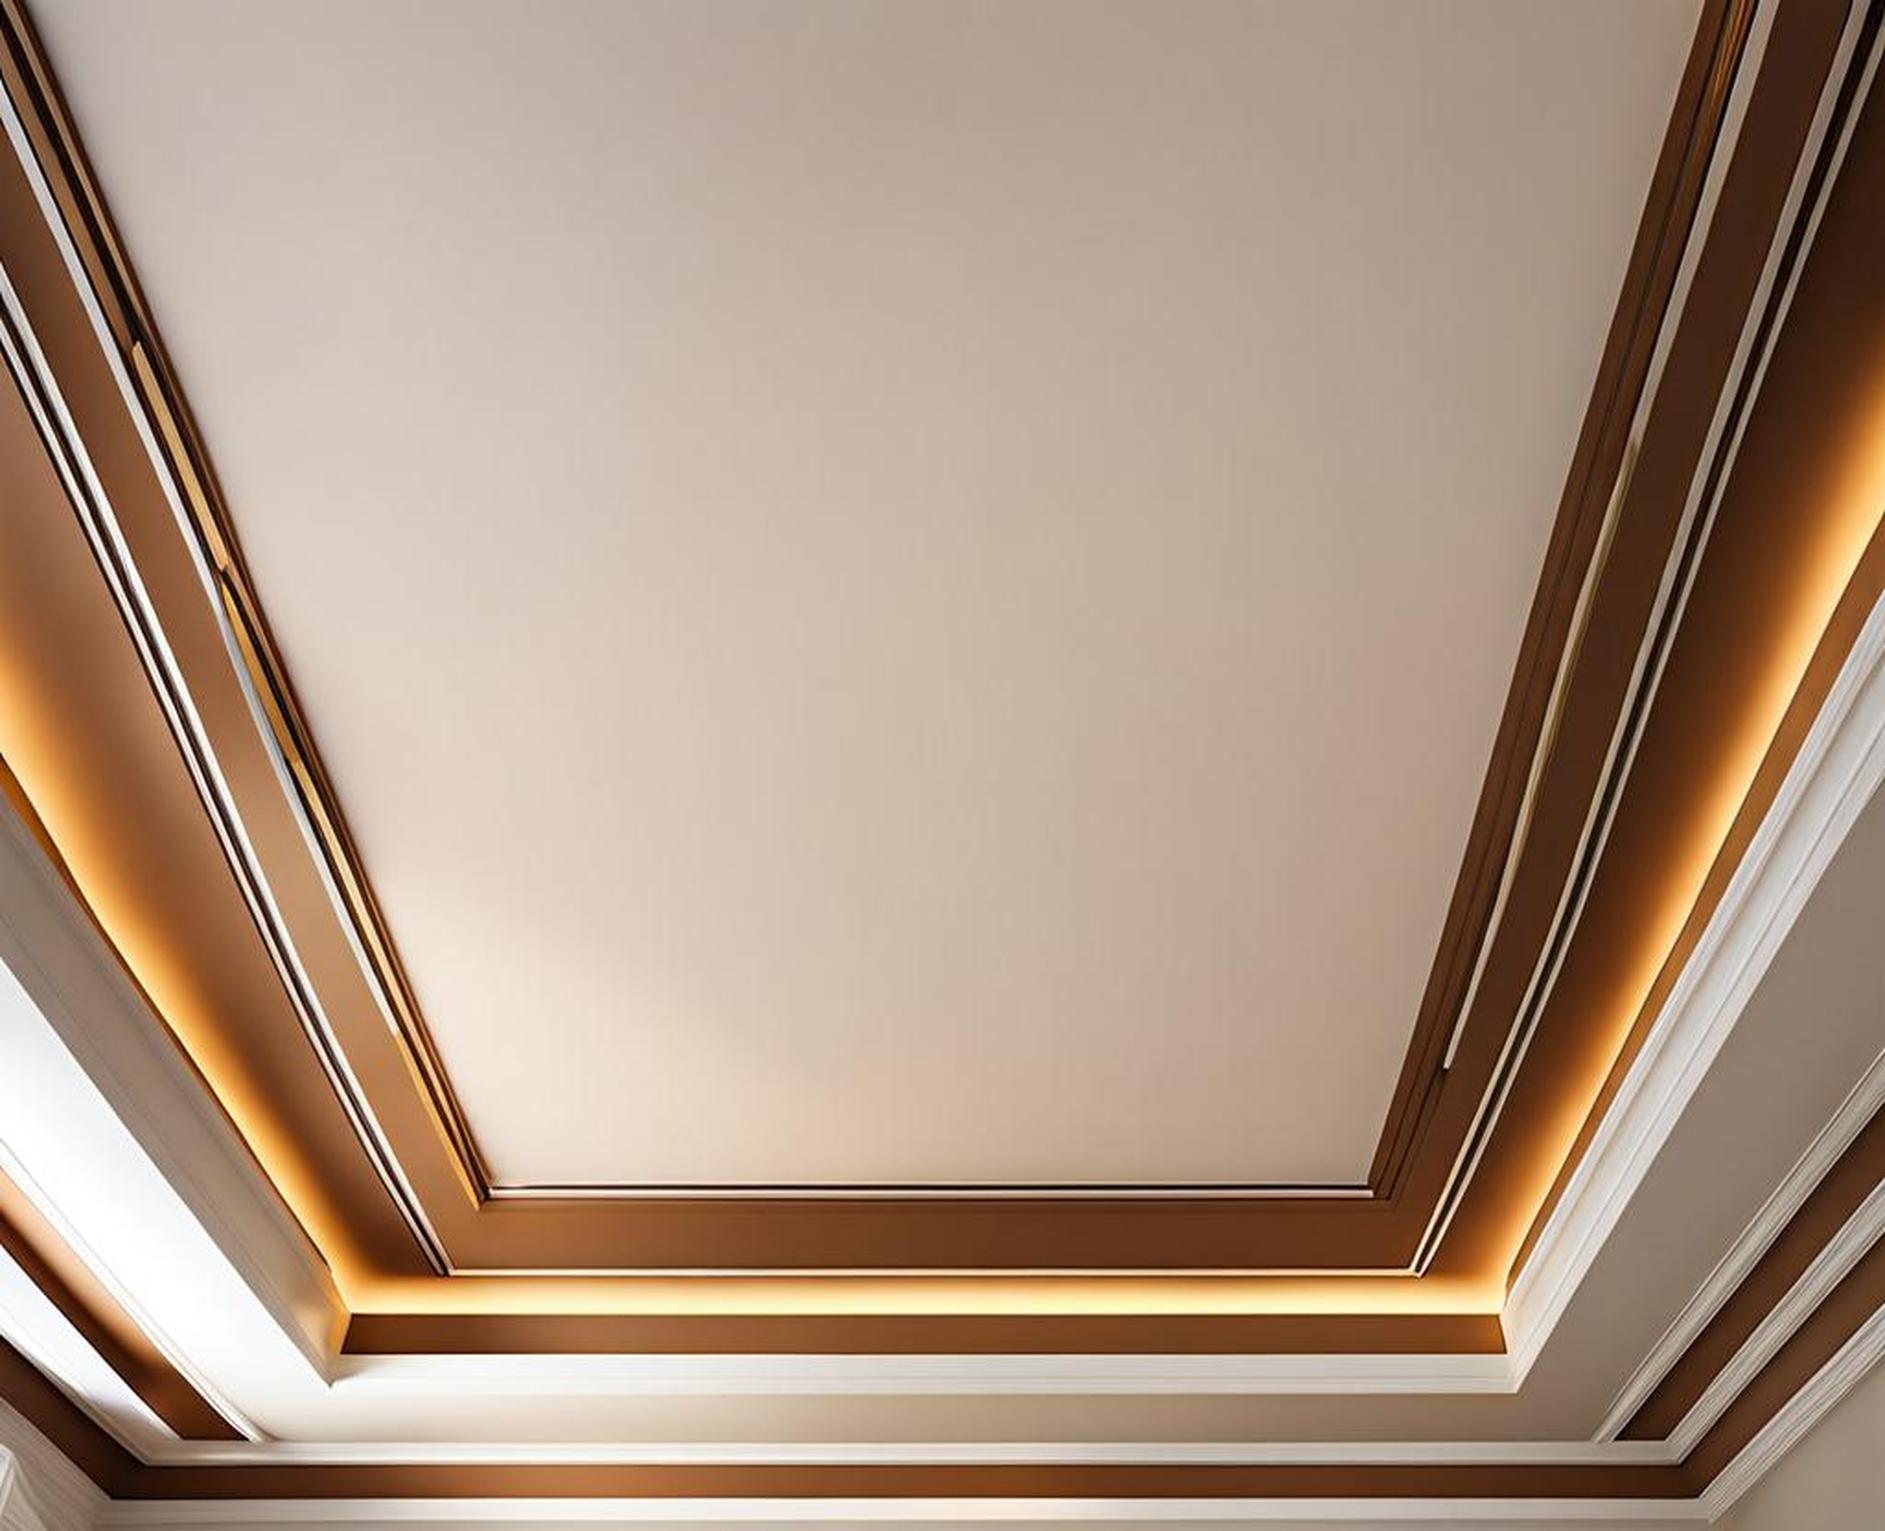 Ceiling Texture Ideas to Give Your Space a Stylish Facelift